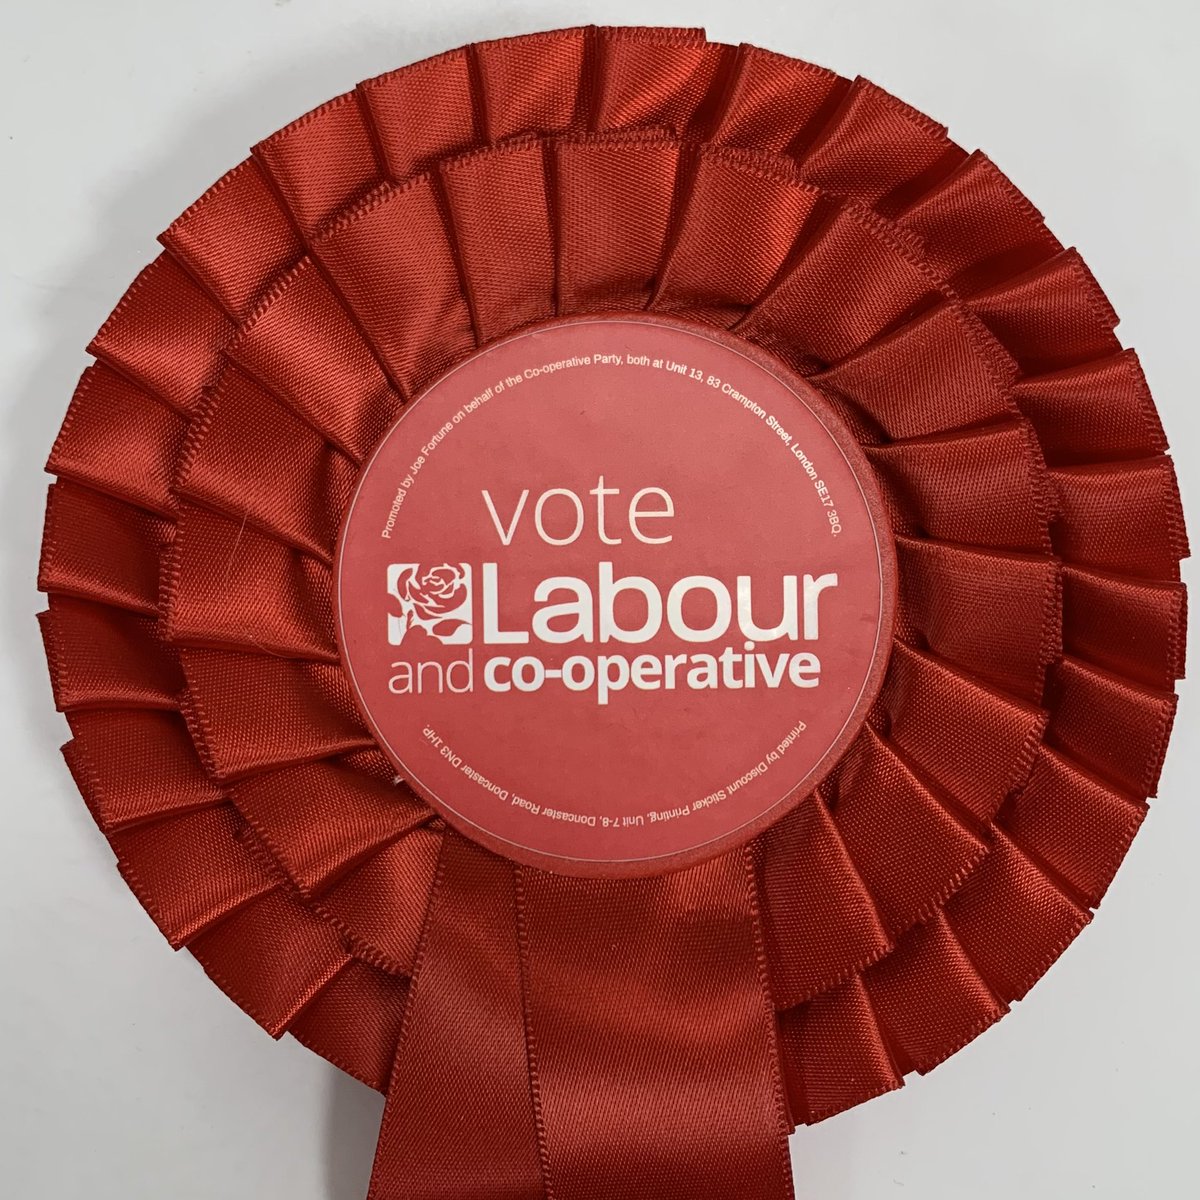 It’s official, I will be the Labour and Cooperative Party candidate for Calder Ward in the forthcoming council elections. I’m proud of my record representing the community where I live for 8 years 🌹🌹 I am looking forward to standing to be our MP whenever Rishi Sunak calls an